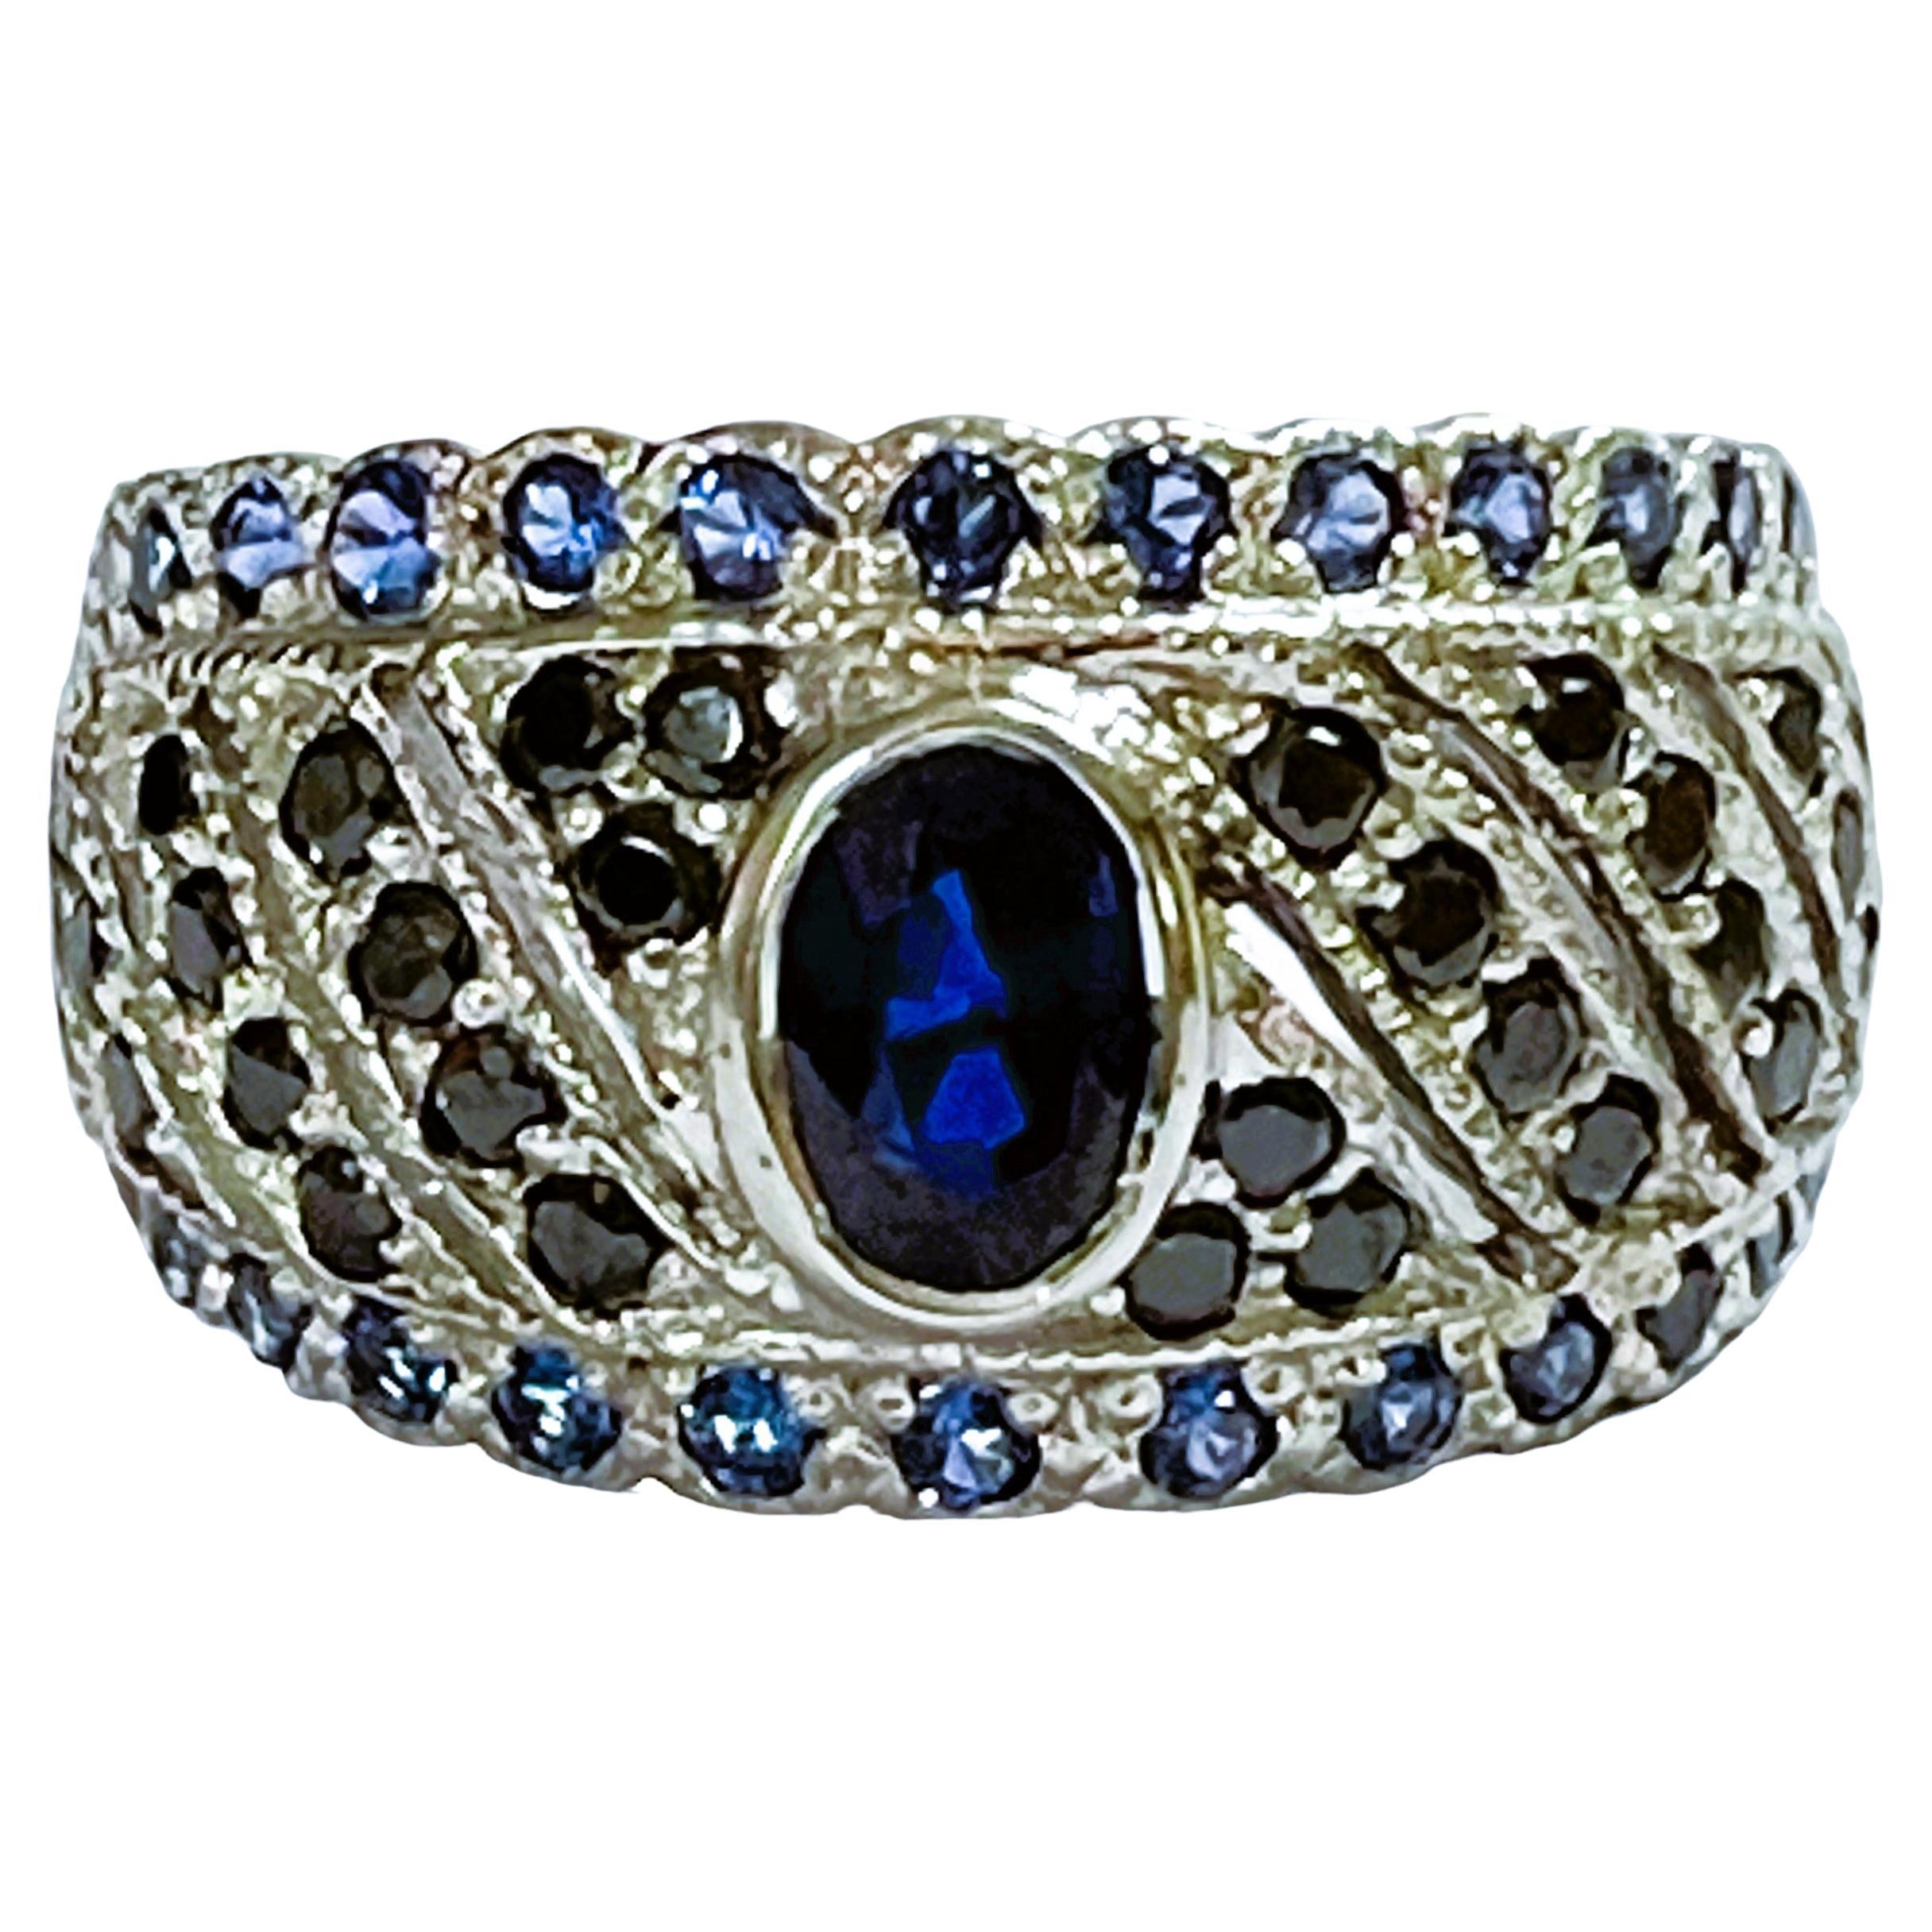 New African If .80 C1 Carat Deep Blue Sapphire Sterling Ring For Sale